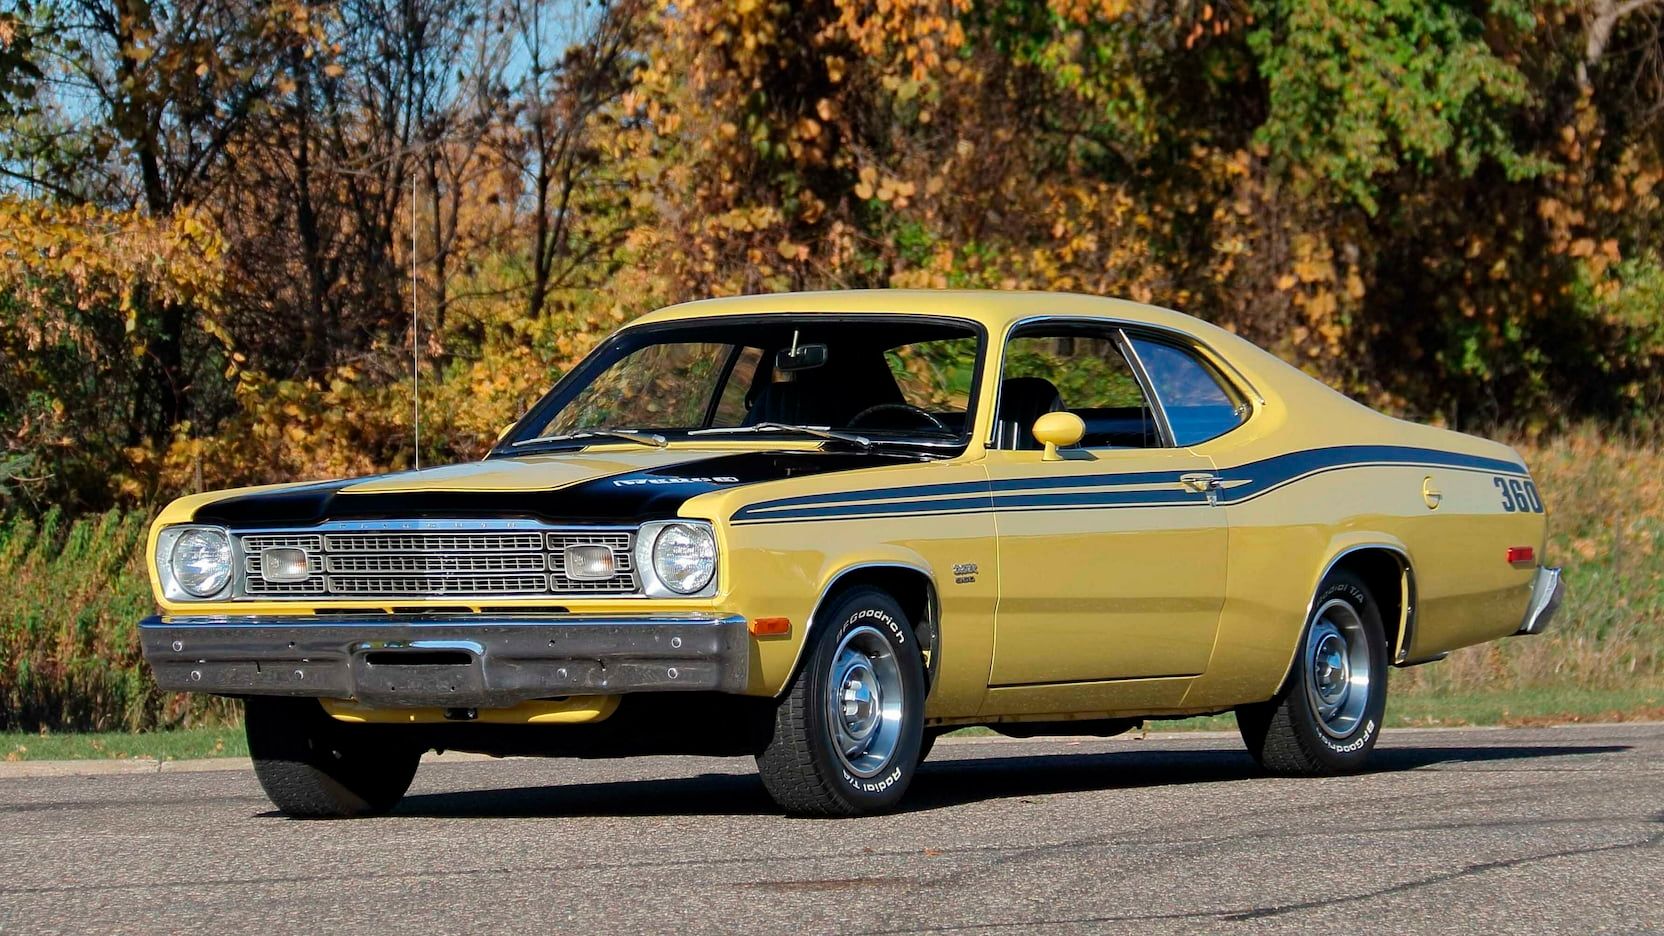 A parked 1974 Plymouth Duster